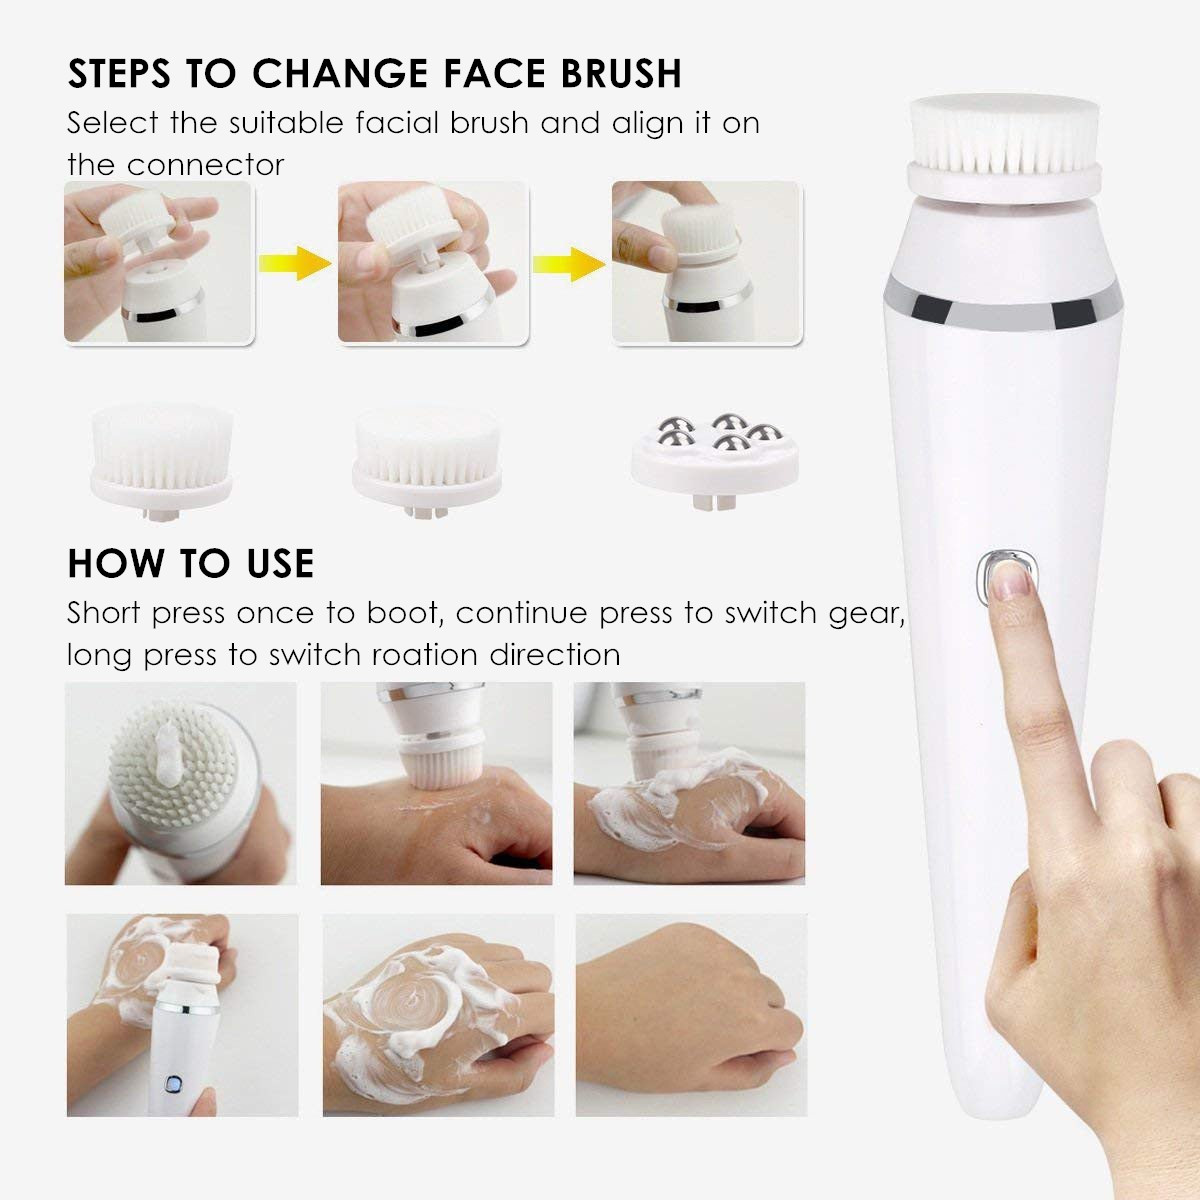 3-in-1-Waterproof-Electric-Facial-Cleansing-Brush-Set-USB-Rechargable-for-Face-Body-Exfoliating-Deep-1437924